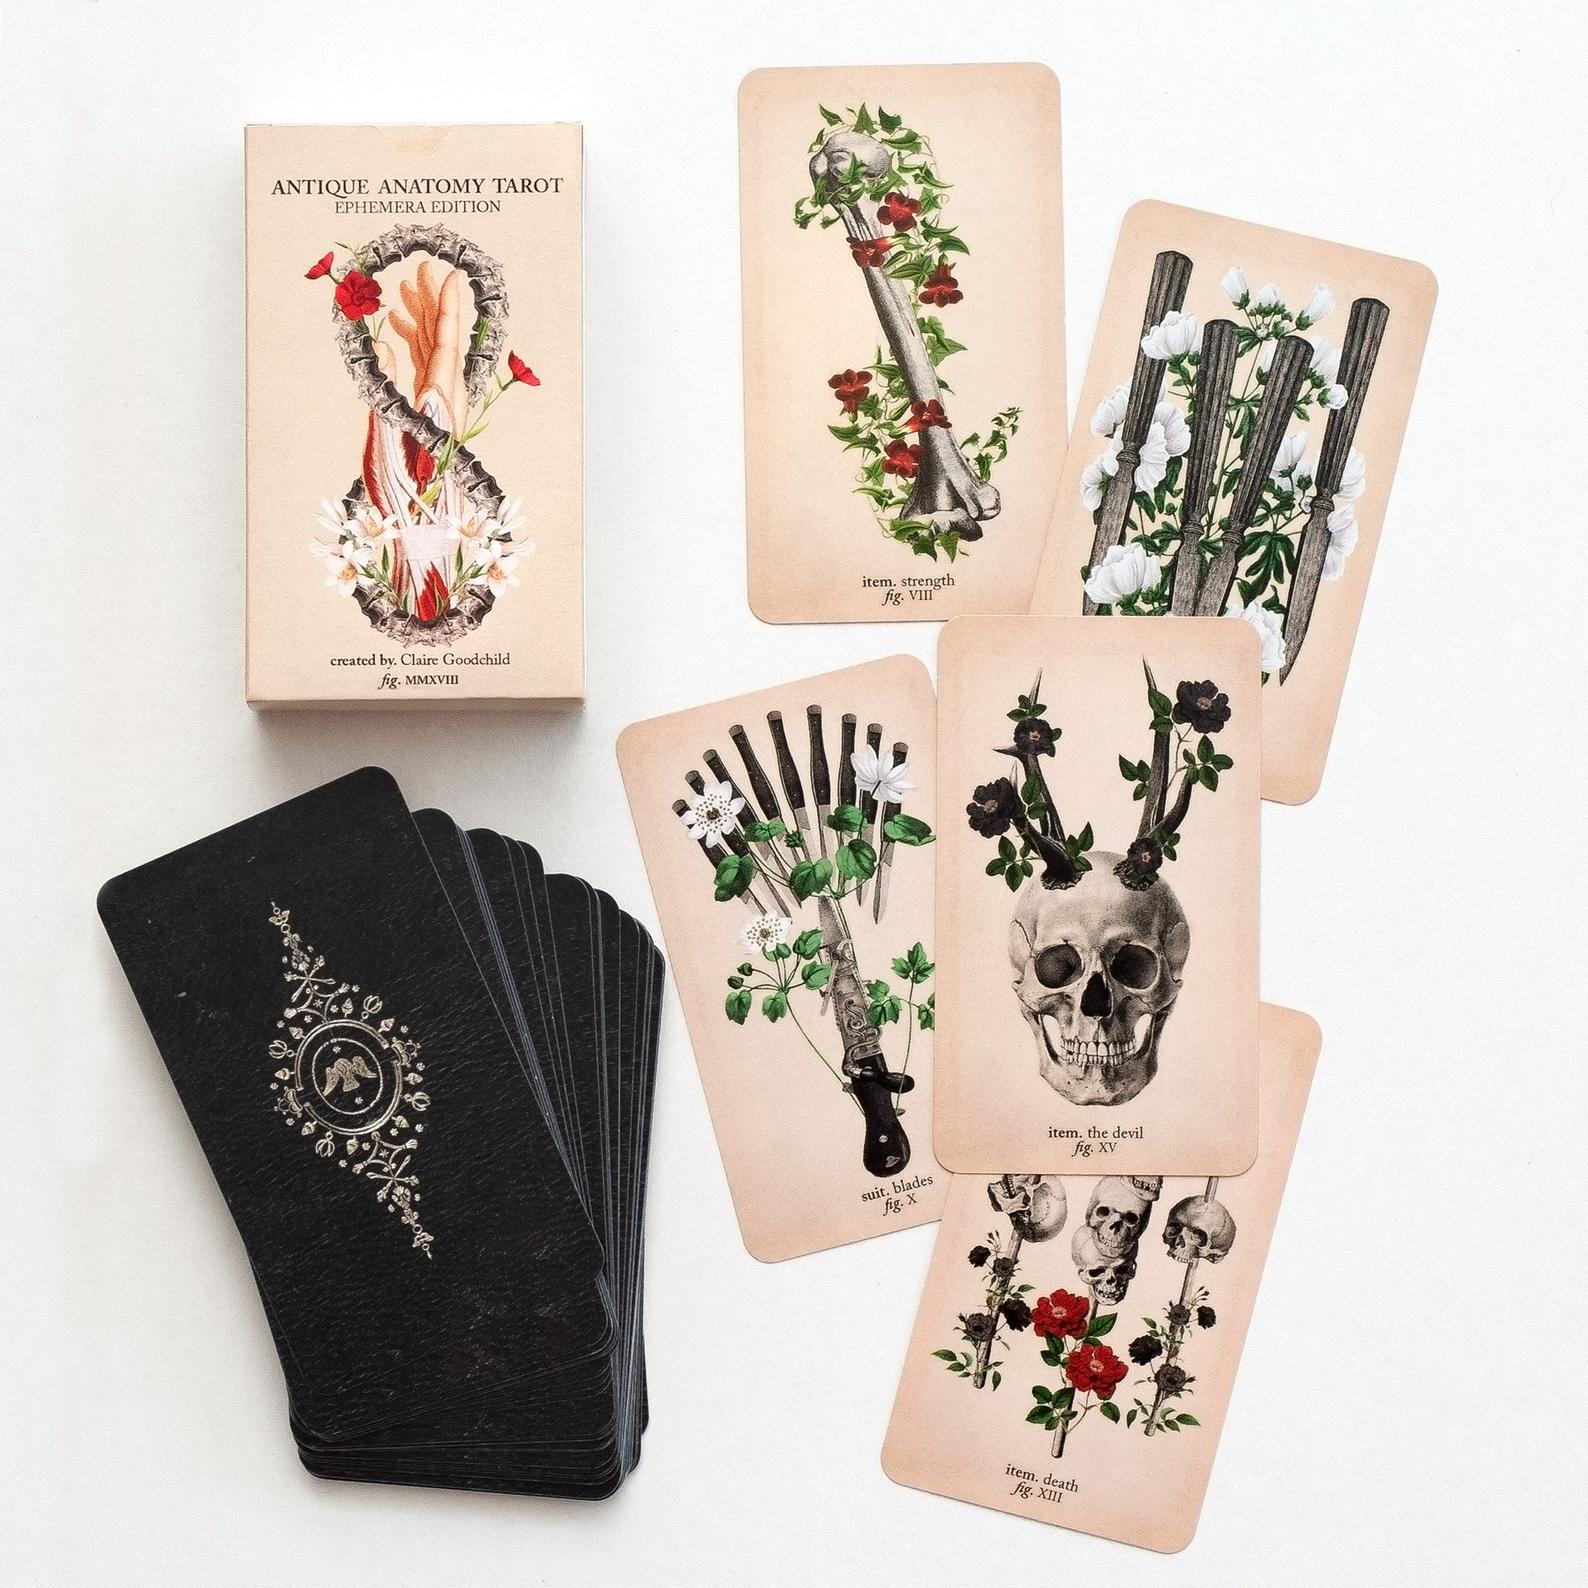 The Antique Anatomy Tarot Kit comes with a 78-card deck and guidebook.